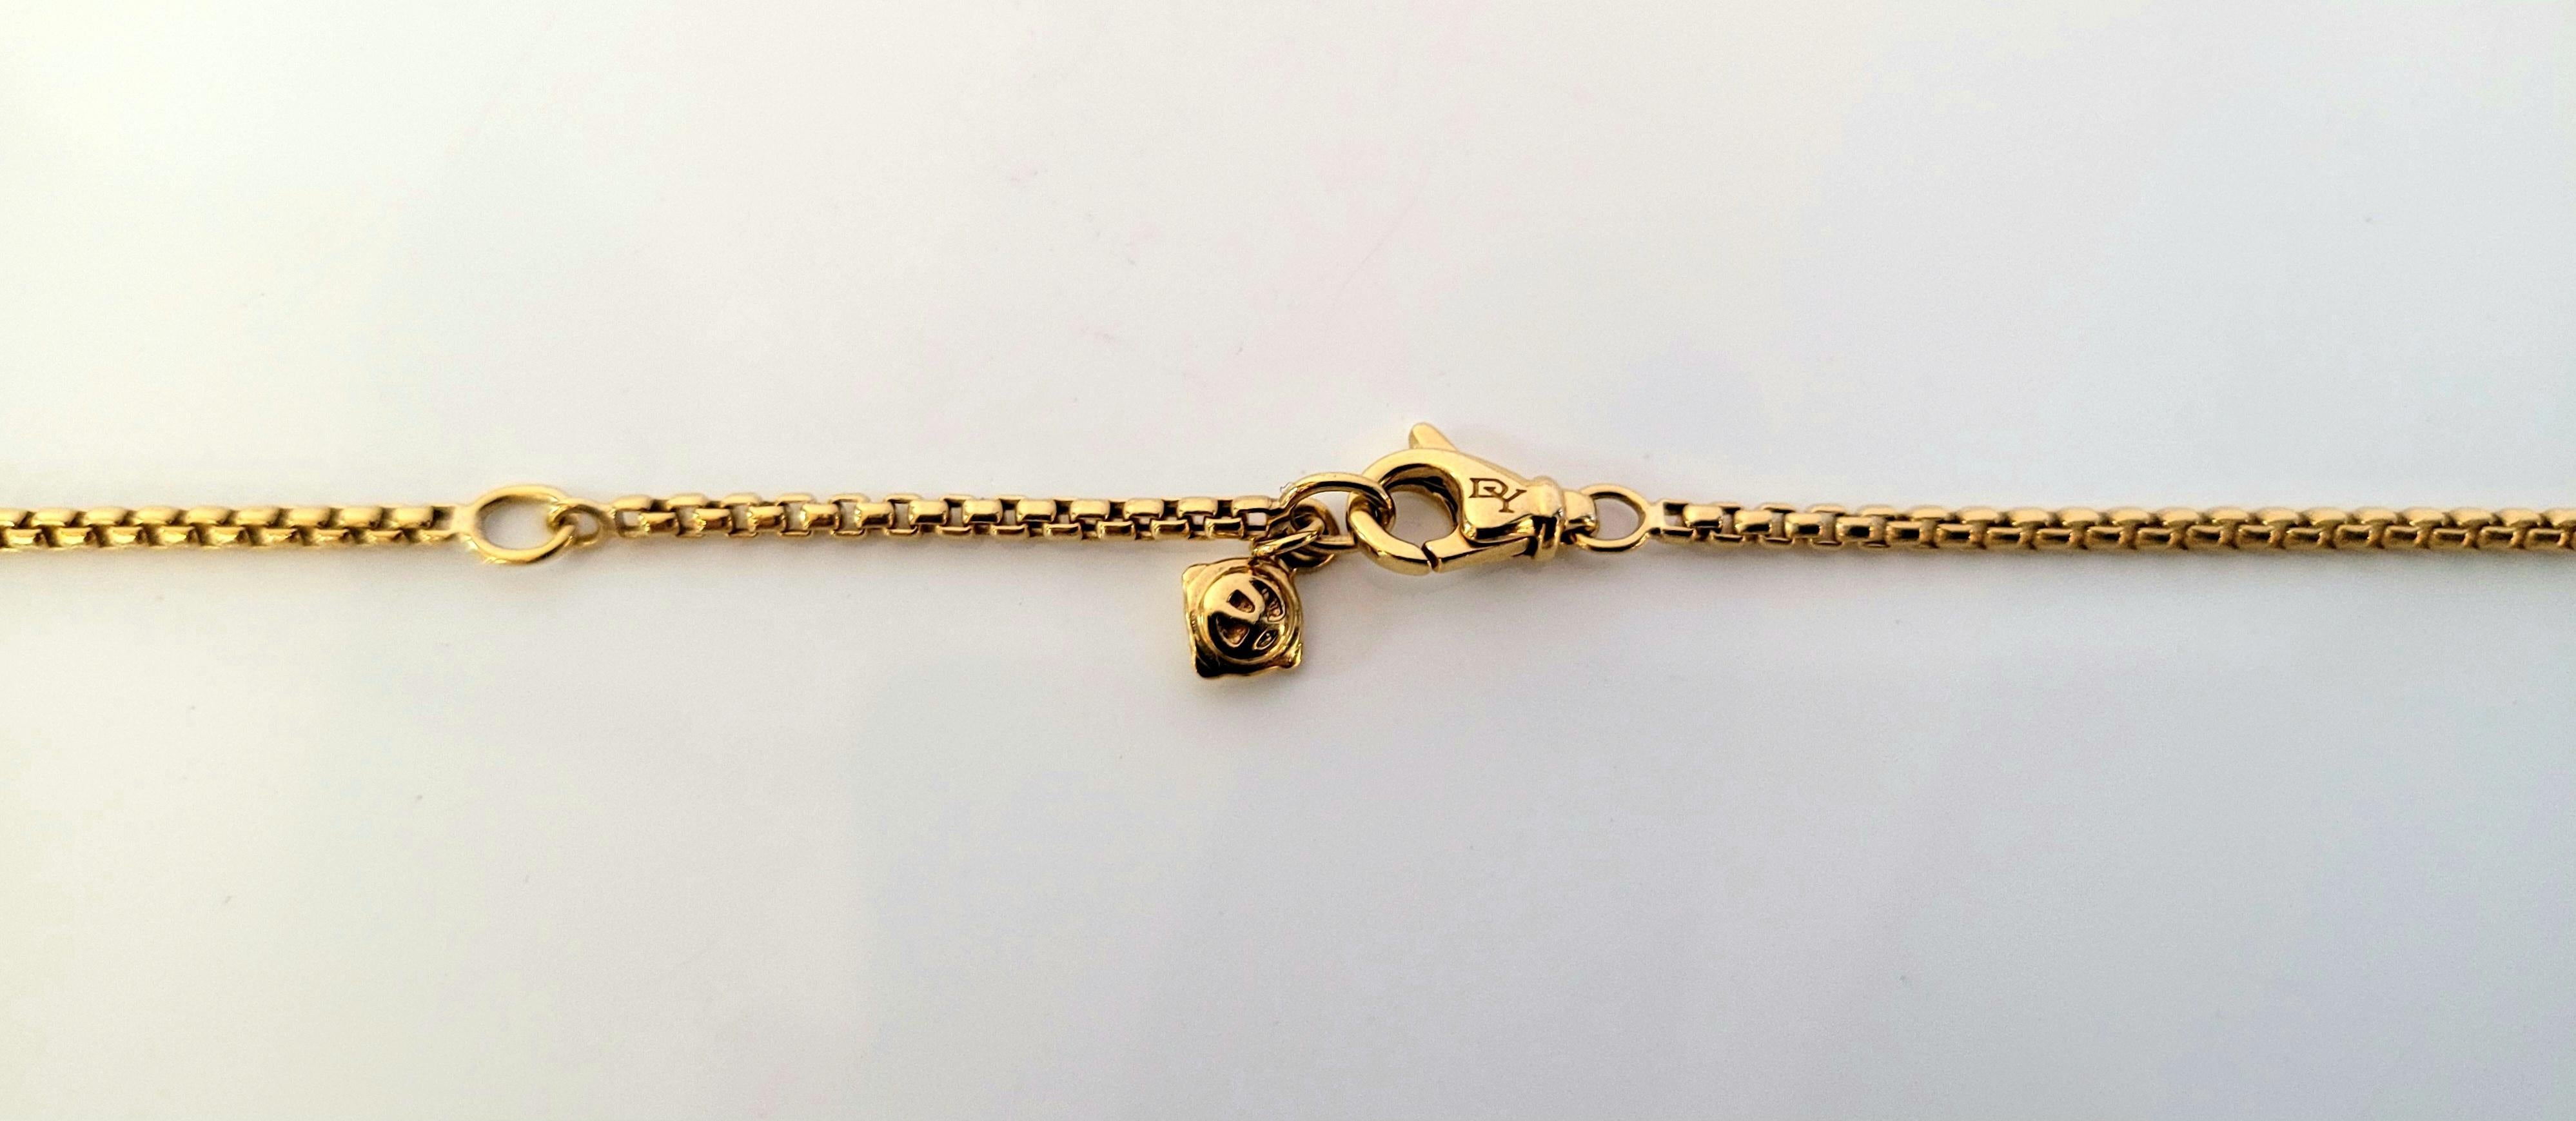 Brand David Yurman
Material 18K yellow Gold
Chain Length 37'' Long 
Adjustable 35''-37'' 
Chain weight 11gr 
Chain Width 1.7mm
Condition New without tags 
Comes with David Yurman Chain Box 
Retail Price:$2.900